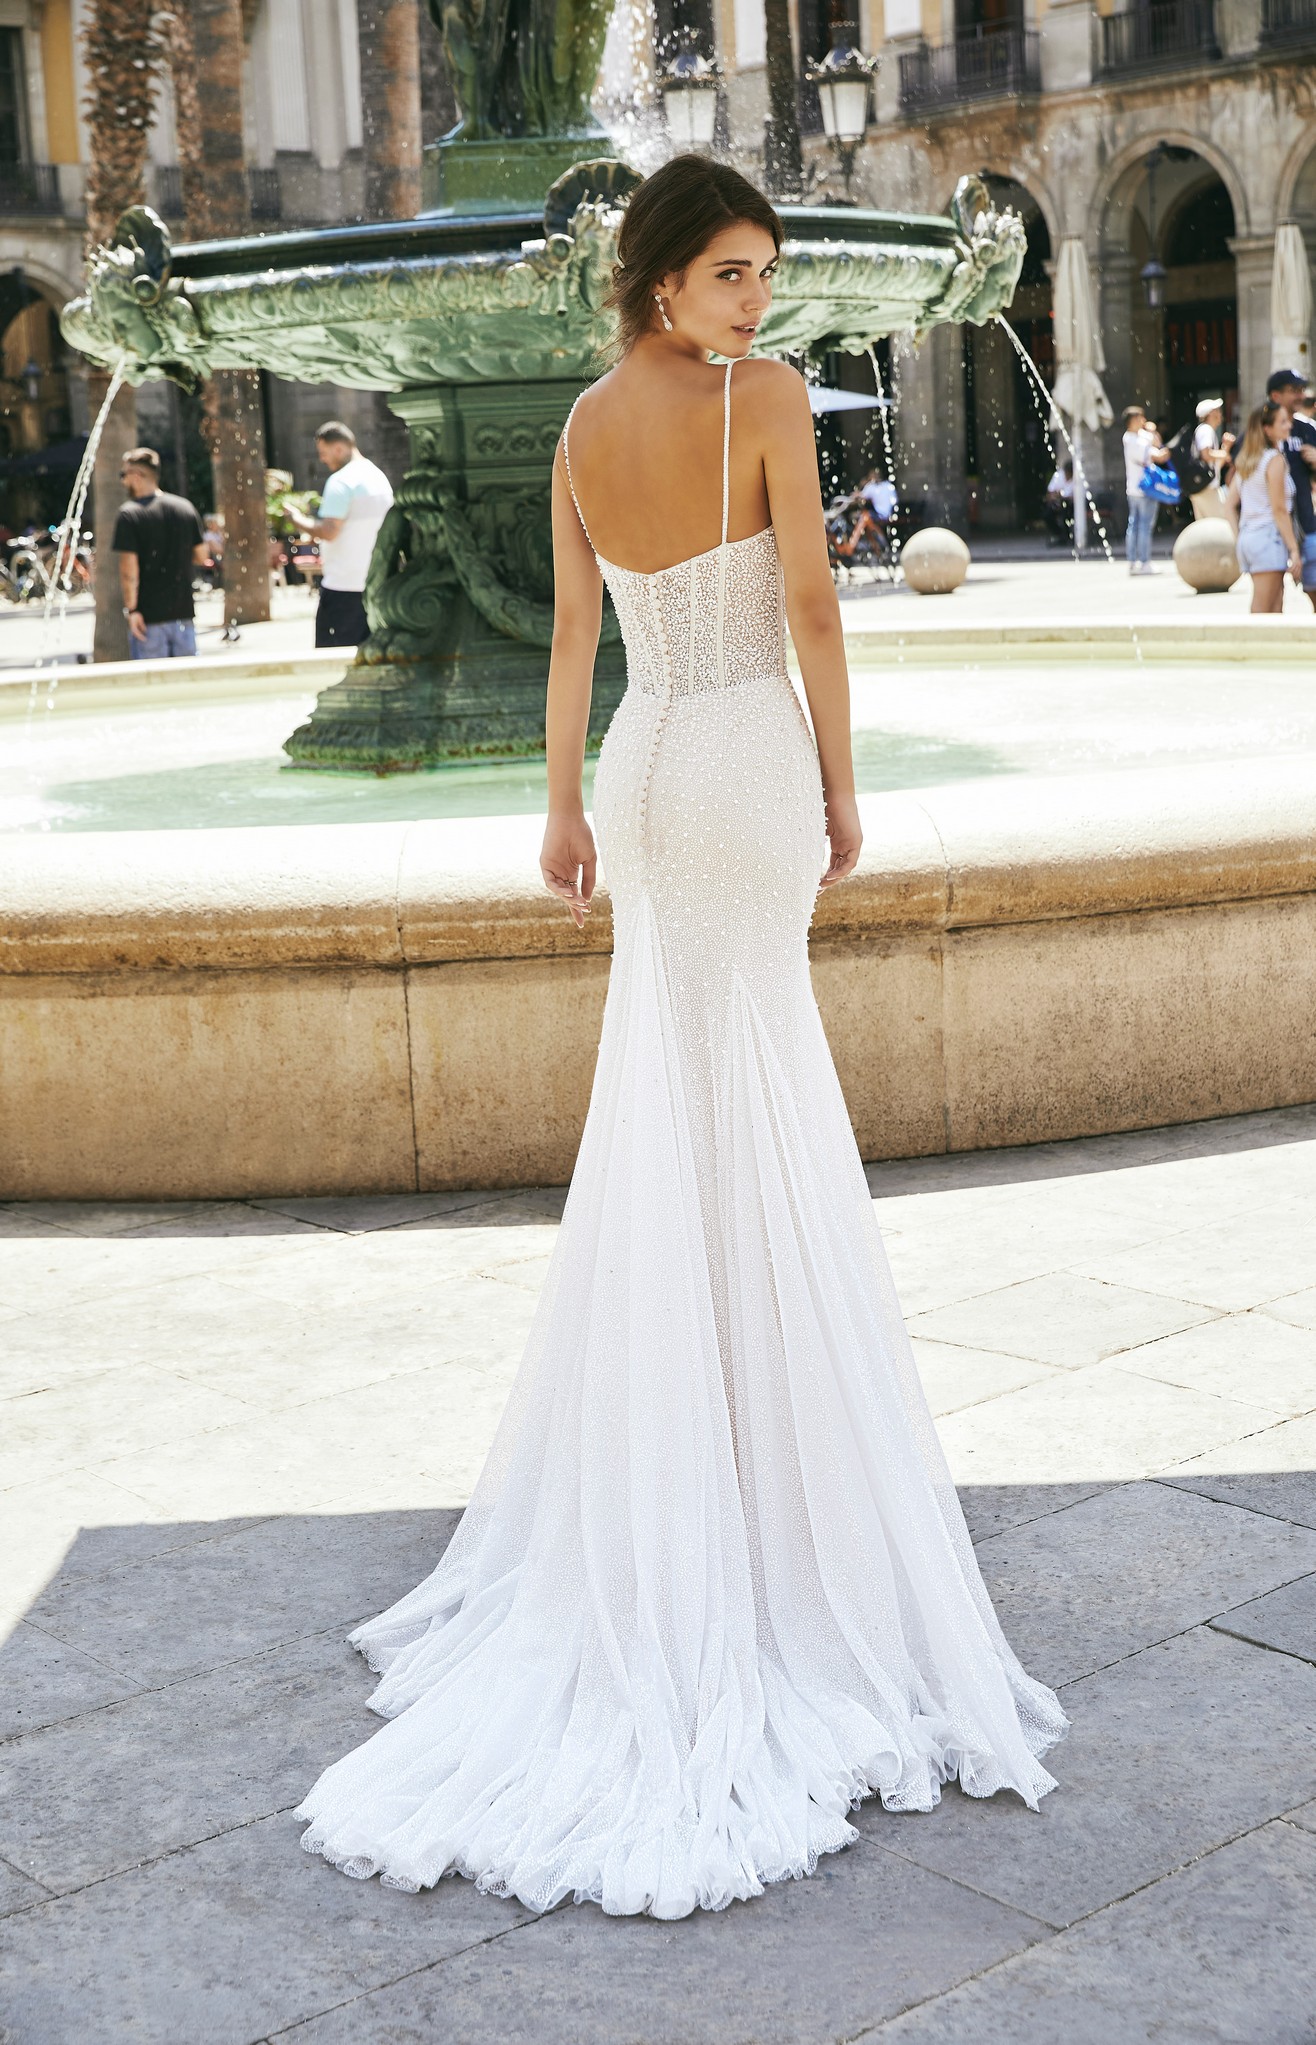 Brown haired woman standing in European plaza wearing pearl beaded wedding dress with sweetheart neckline and spaghetti straps